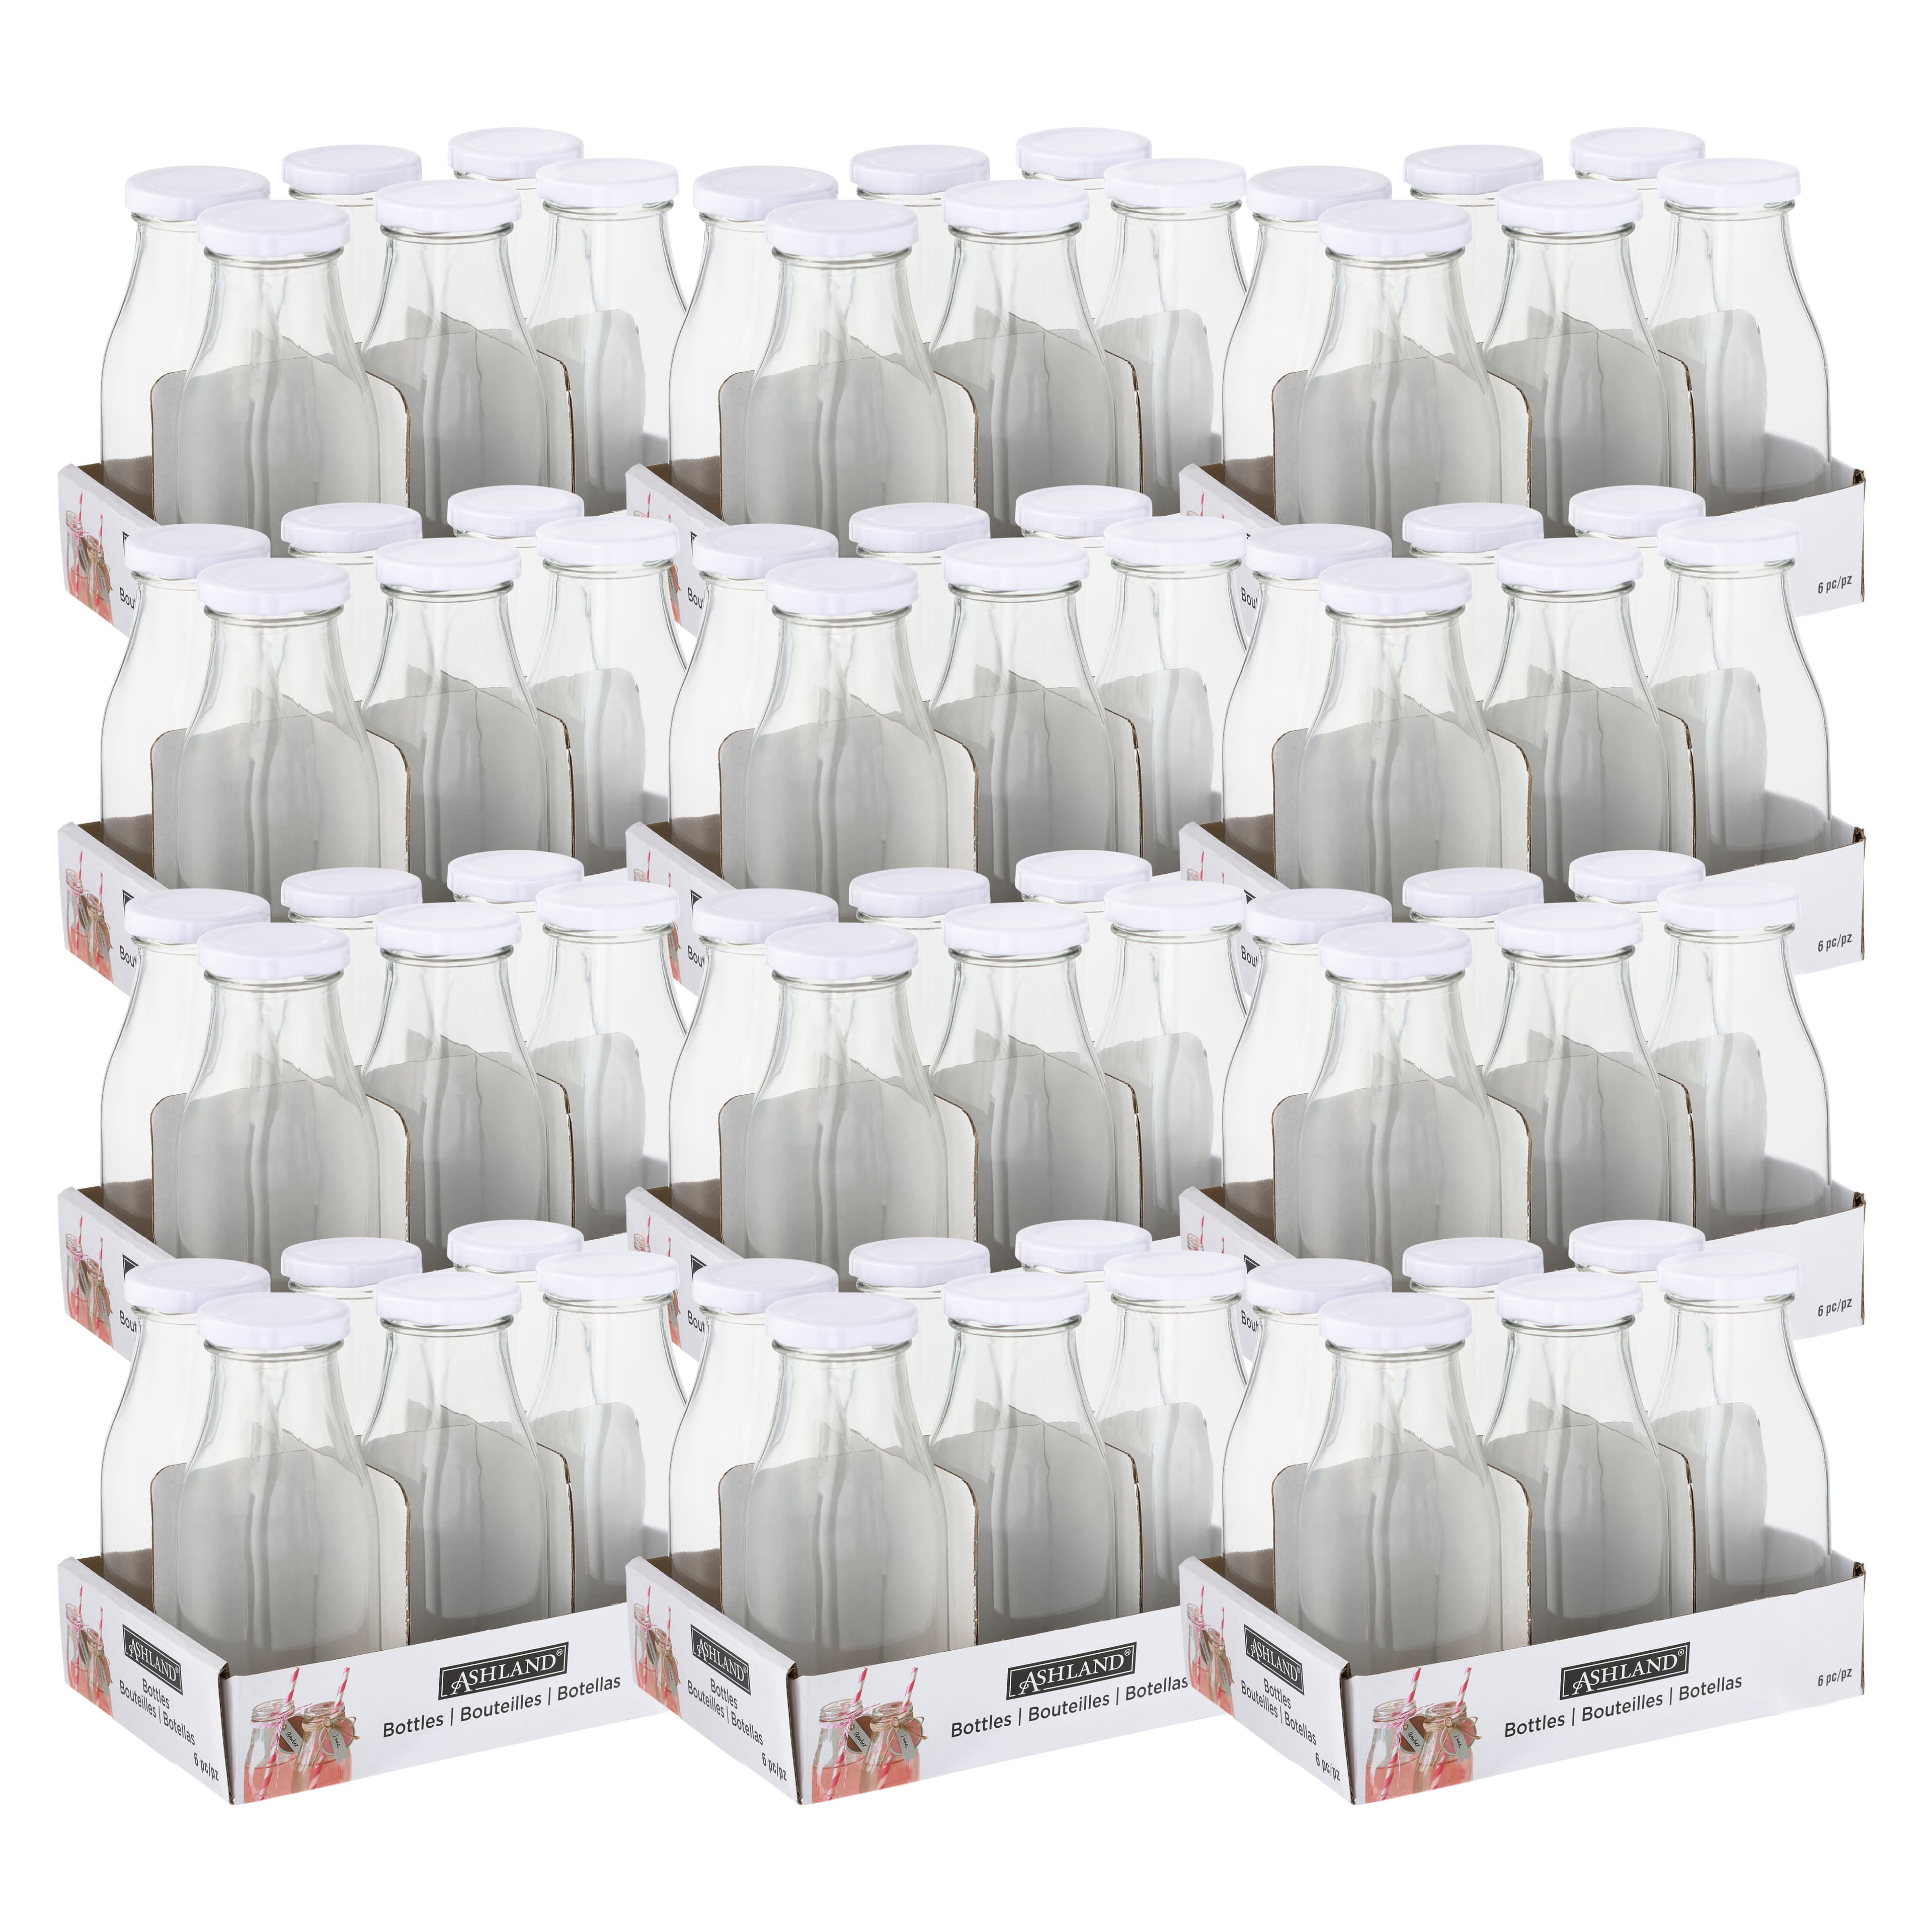 12 Packs: 6 ct. (72 total) 8oz. Glass Milk Bottles with Lids by